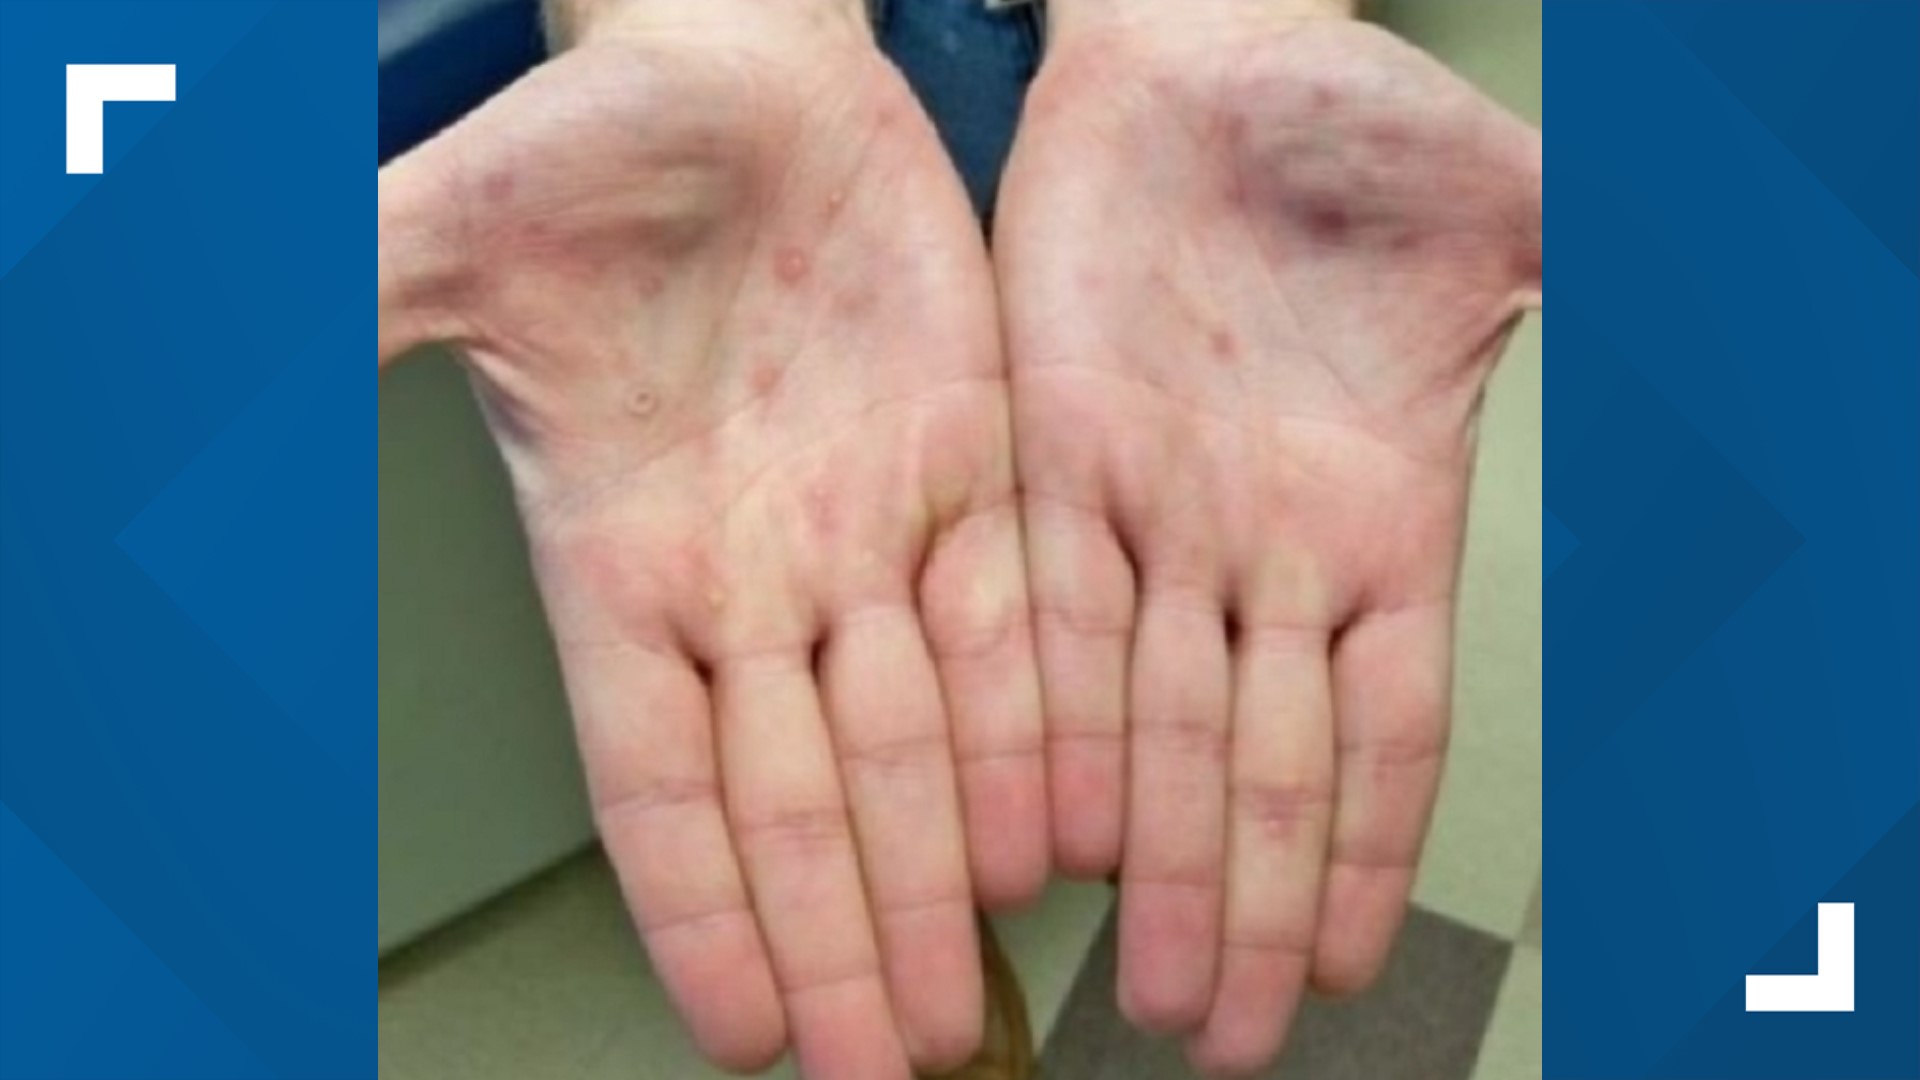 Casey Hampton first thought they were heat rashes, but a trip to his doctor and dermatologist told him otherwise: he had monkeypox.